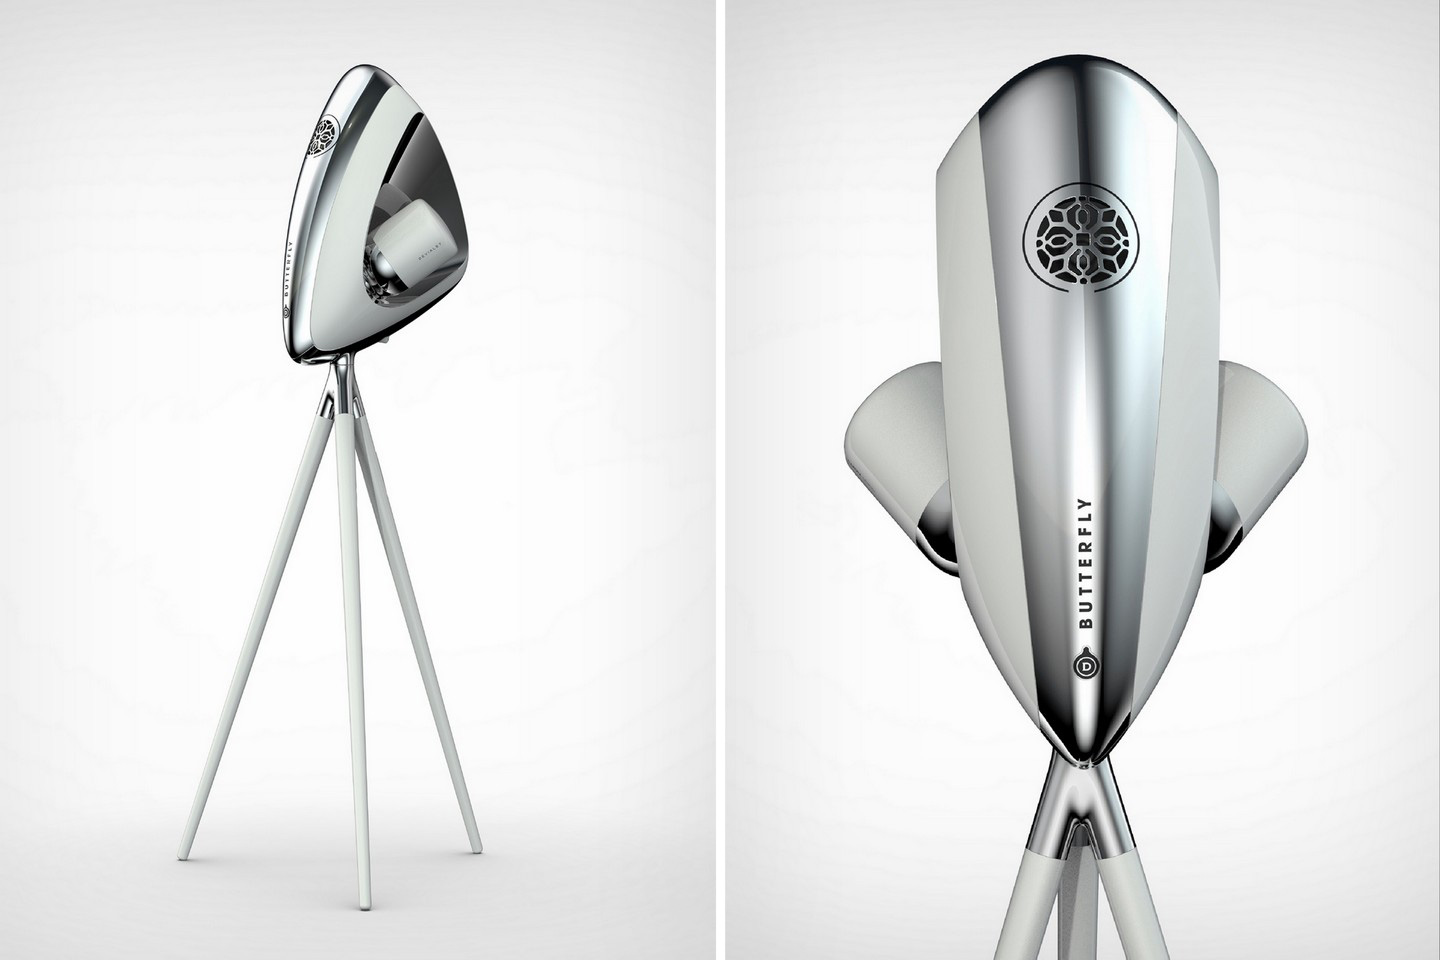 #Stunning Devialet Butterfly speaker concept comes with an elegant design and dual-firing audio chambers